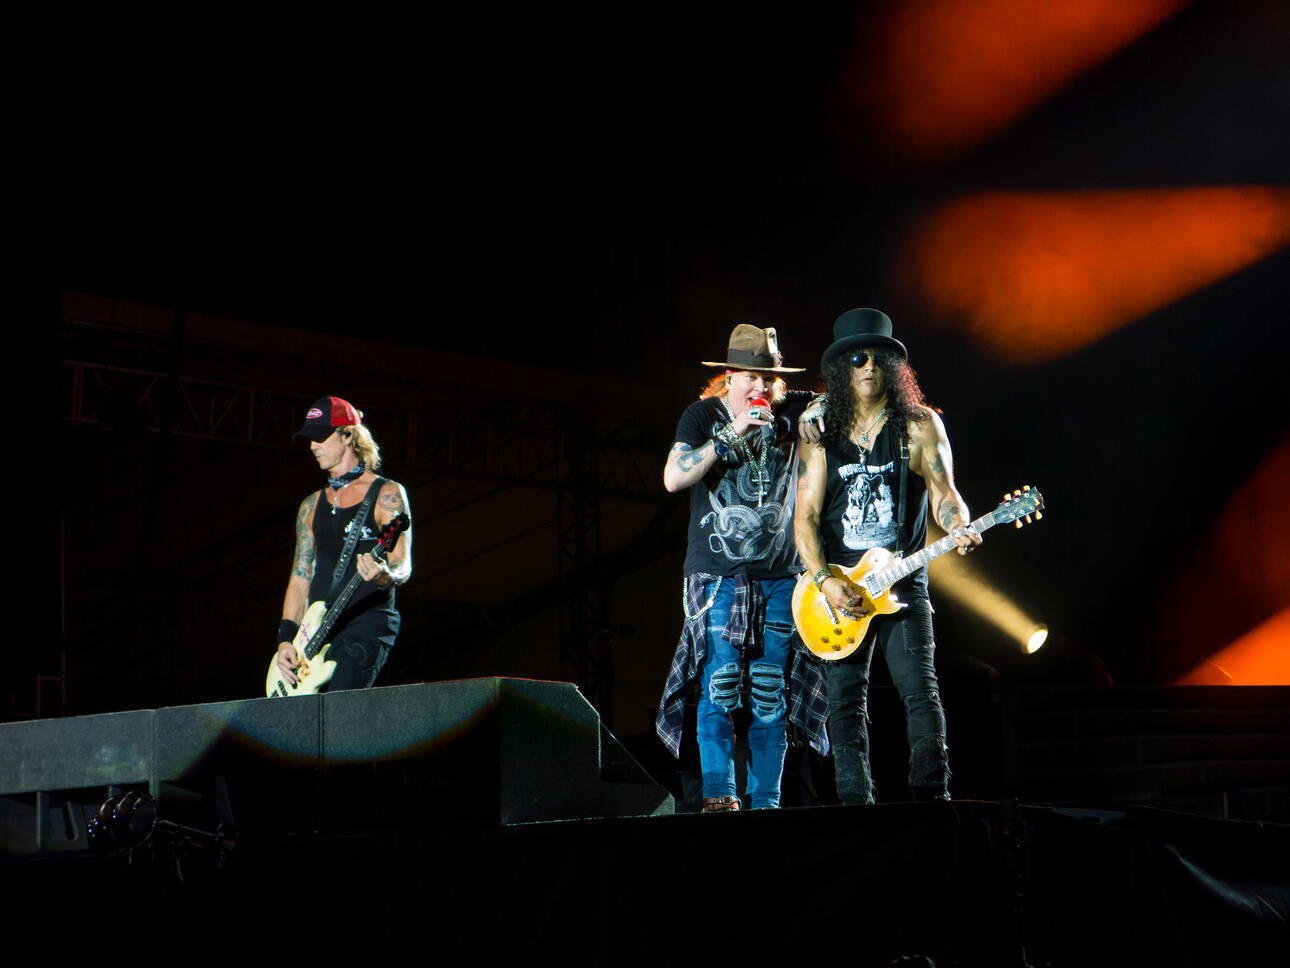 Guns 'n Roses live in Sao Paulo in 2016 with guitarist Slash on the right alongside singer Axl Rose.